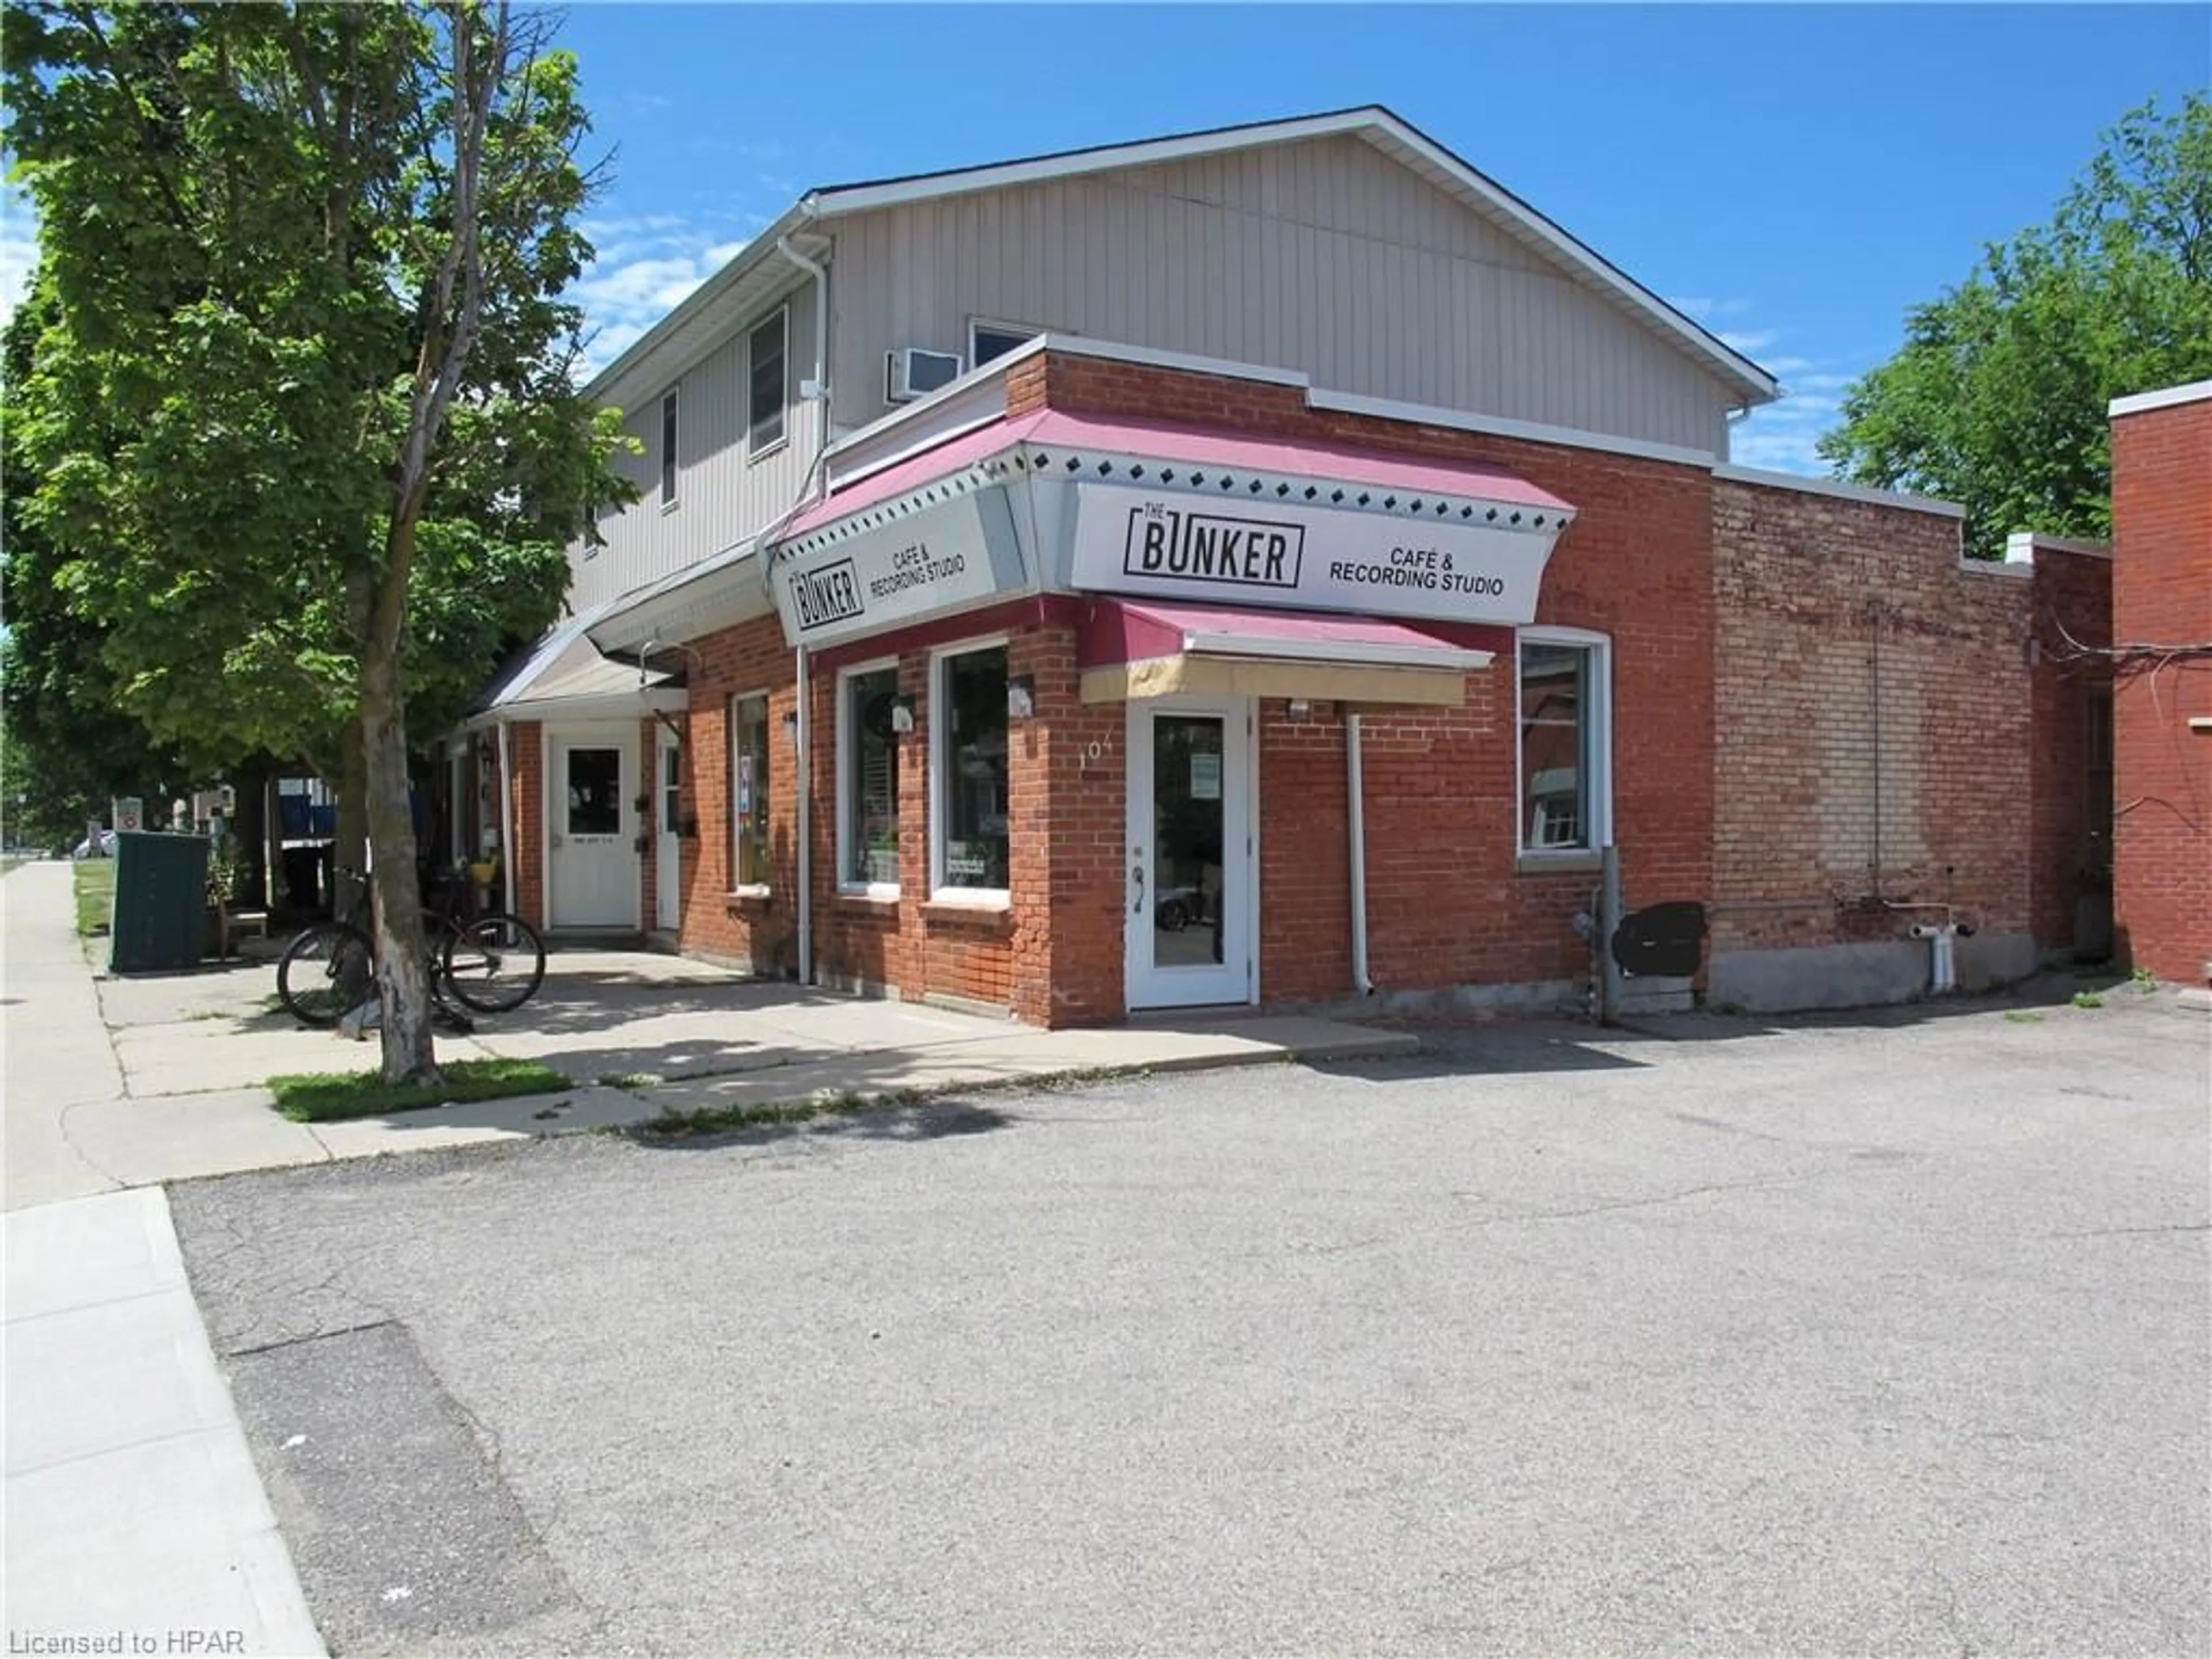 Outside view for 108,106,104 Wellington St, Stratford Ontario N5A 2L5